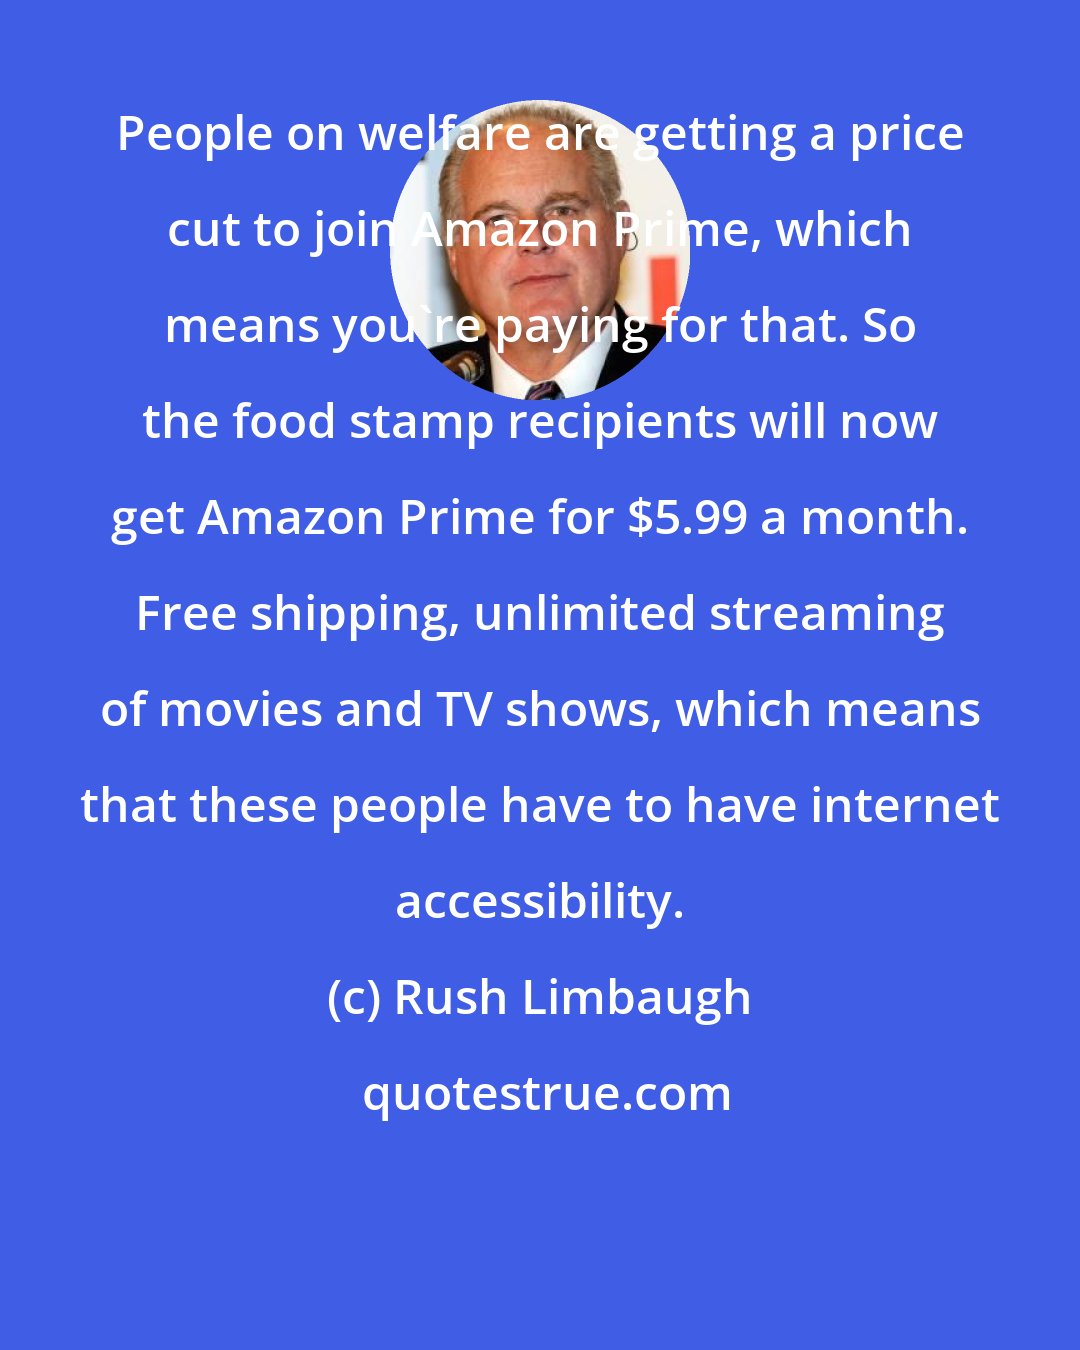 Rush Limbaugh: People on welfare are getting a price cut to join Amazon Prime, which means you're paying for that. So the food stamp recipients will now get Amazon Prime for $5.99 a month. Free shipping, unlimited streaming of movies and TV shows, which means that these people have to have internet accessibility.